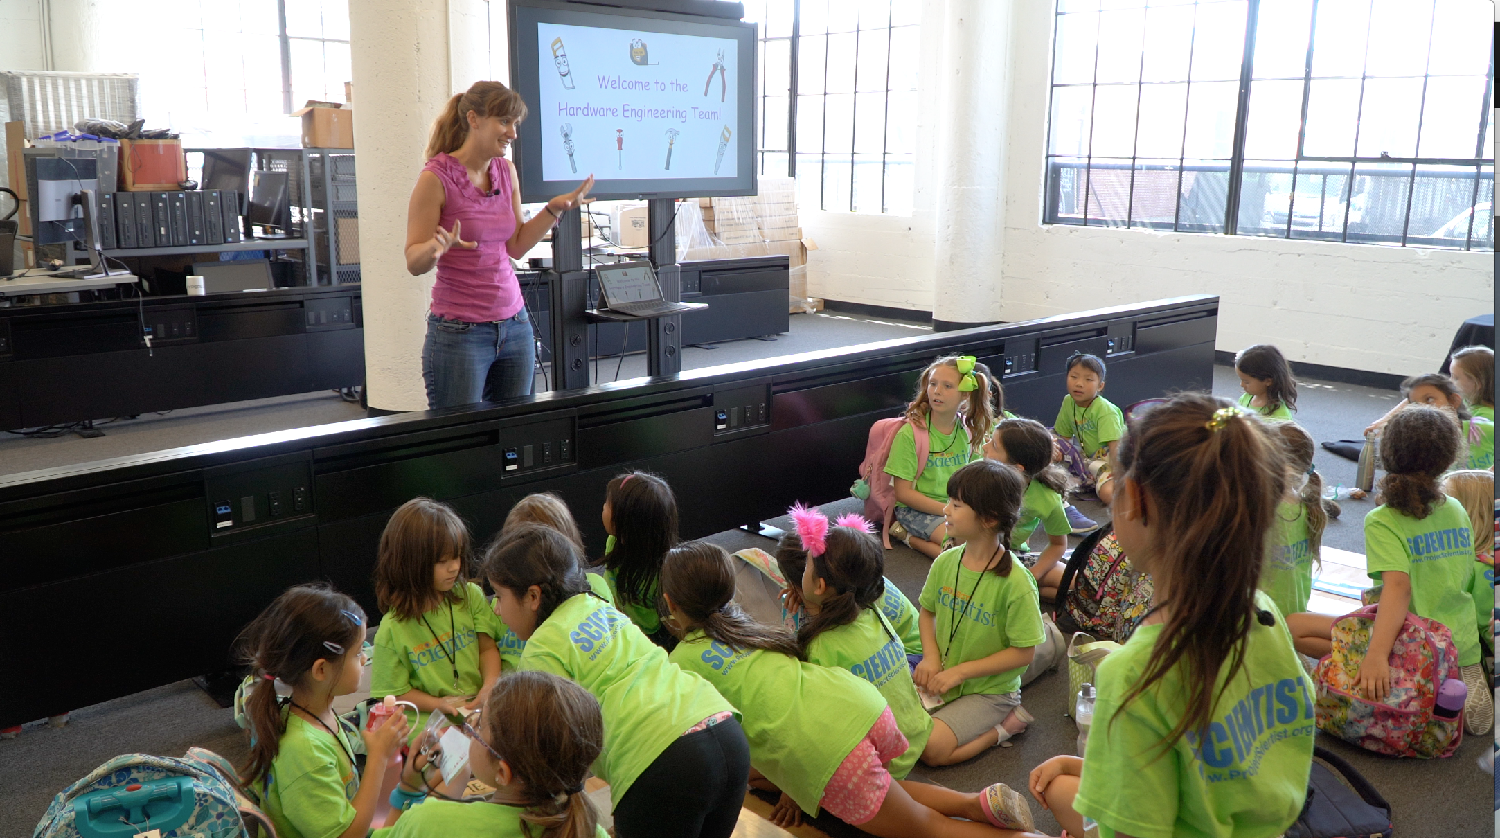 VHO presents to Project Scientist, a STEM summer camp for girls